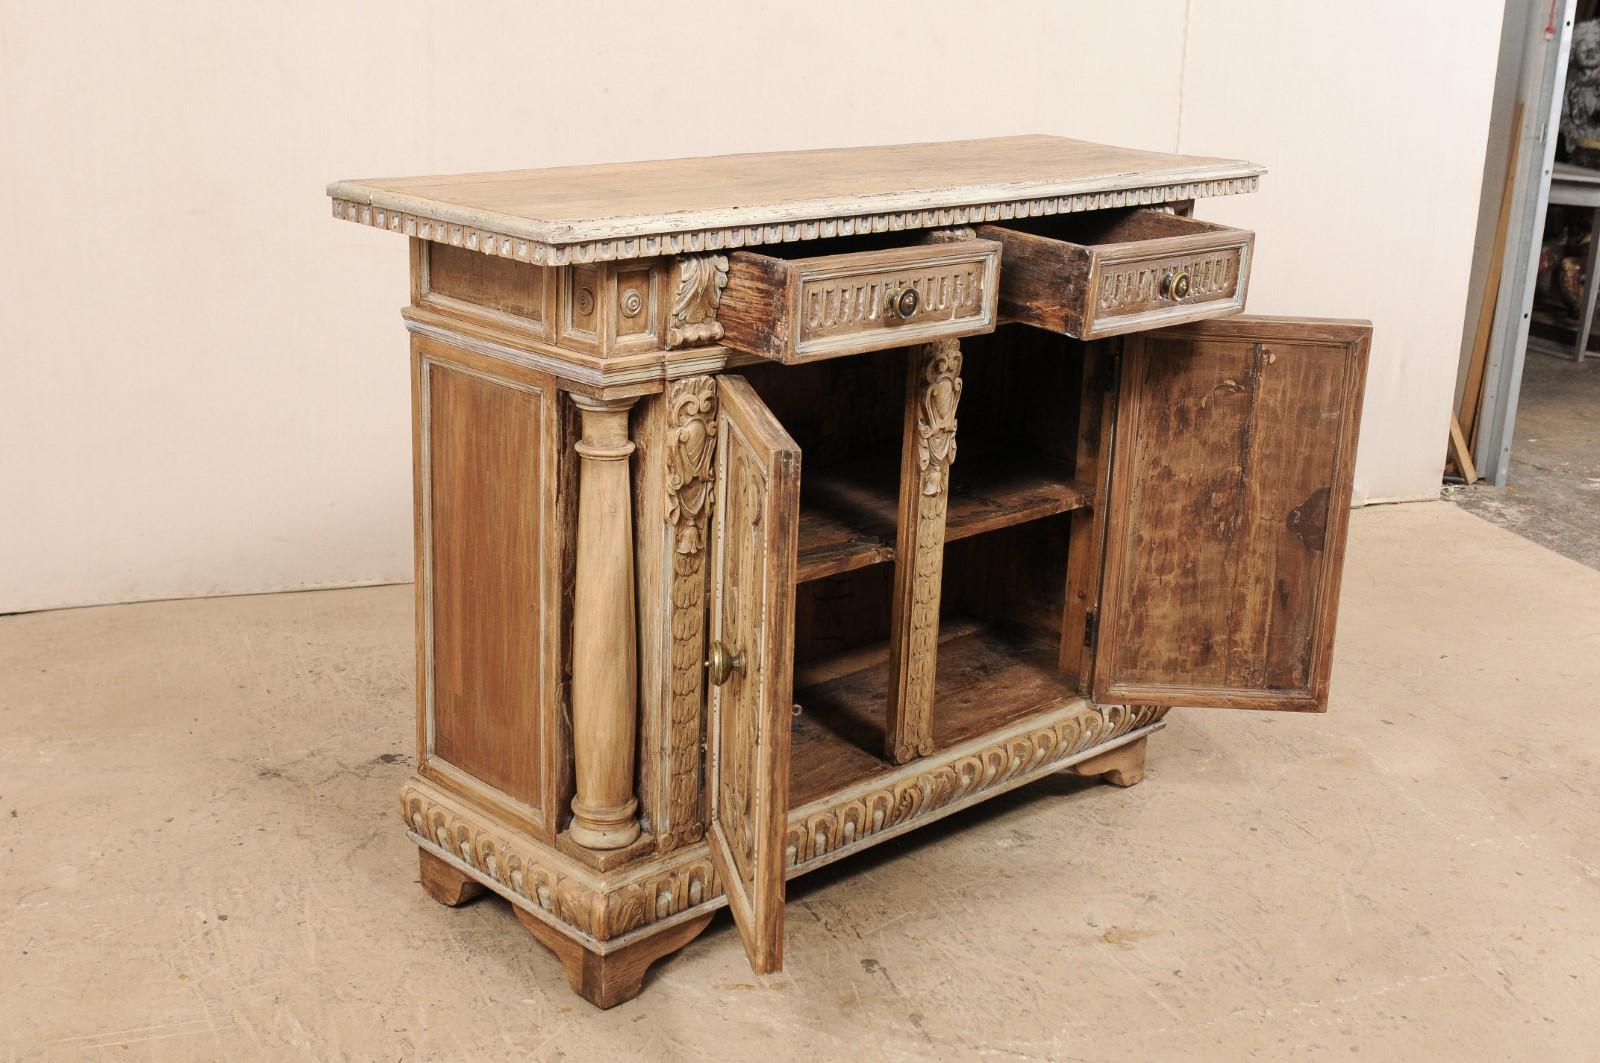 Italian Elaborately-Carved Wood Buffet Console Cabinet, Late 19th Century For Sale 2